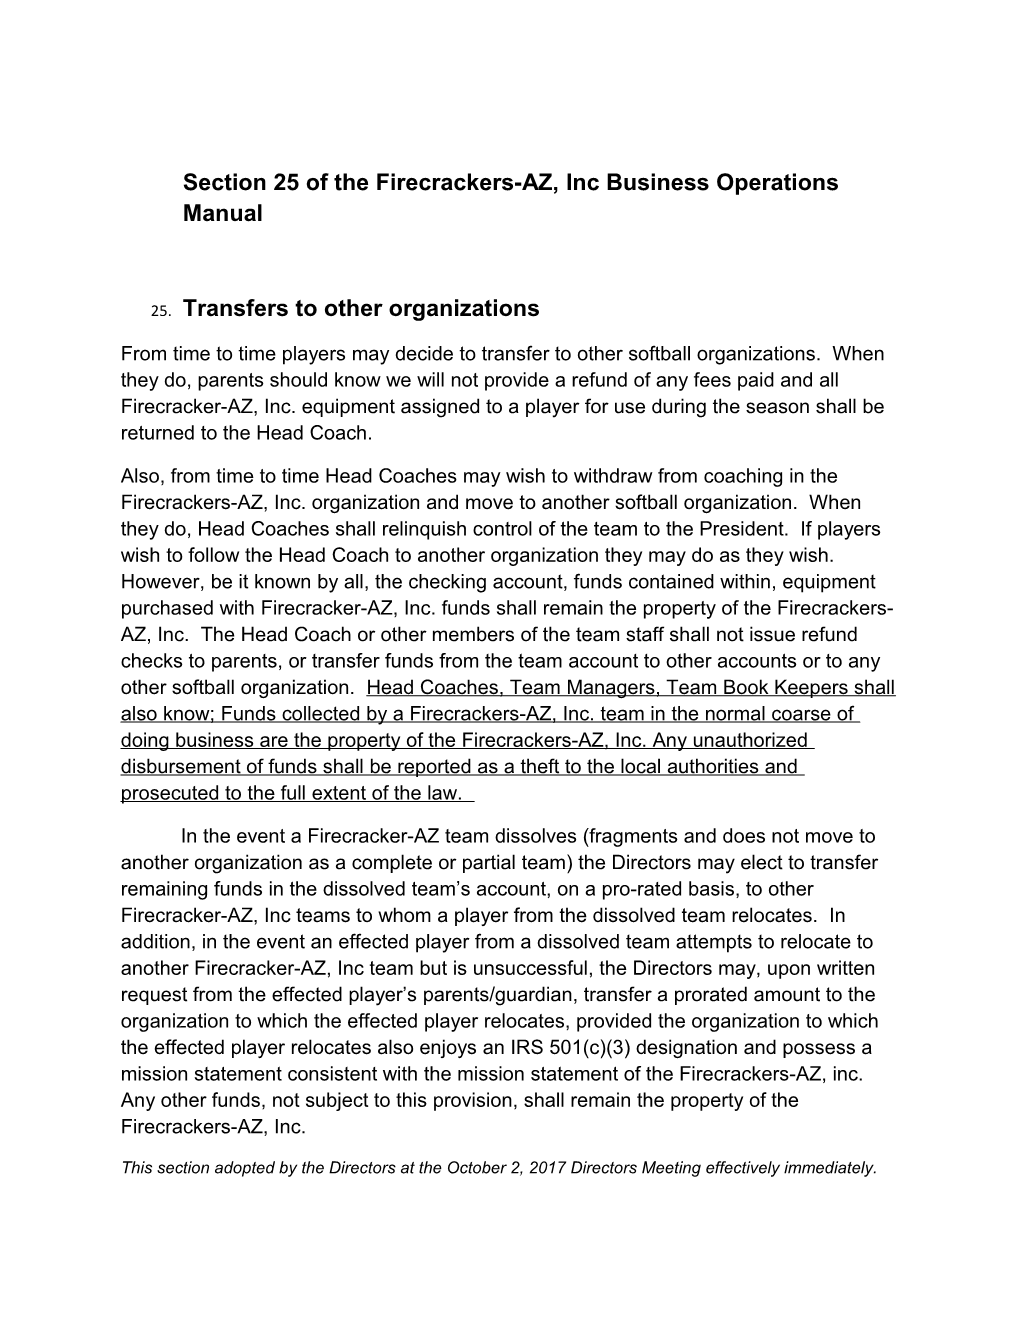 Section 25 of the Firecrackers-AZ, Inc Business Operations Manual